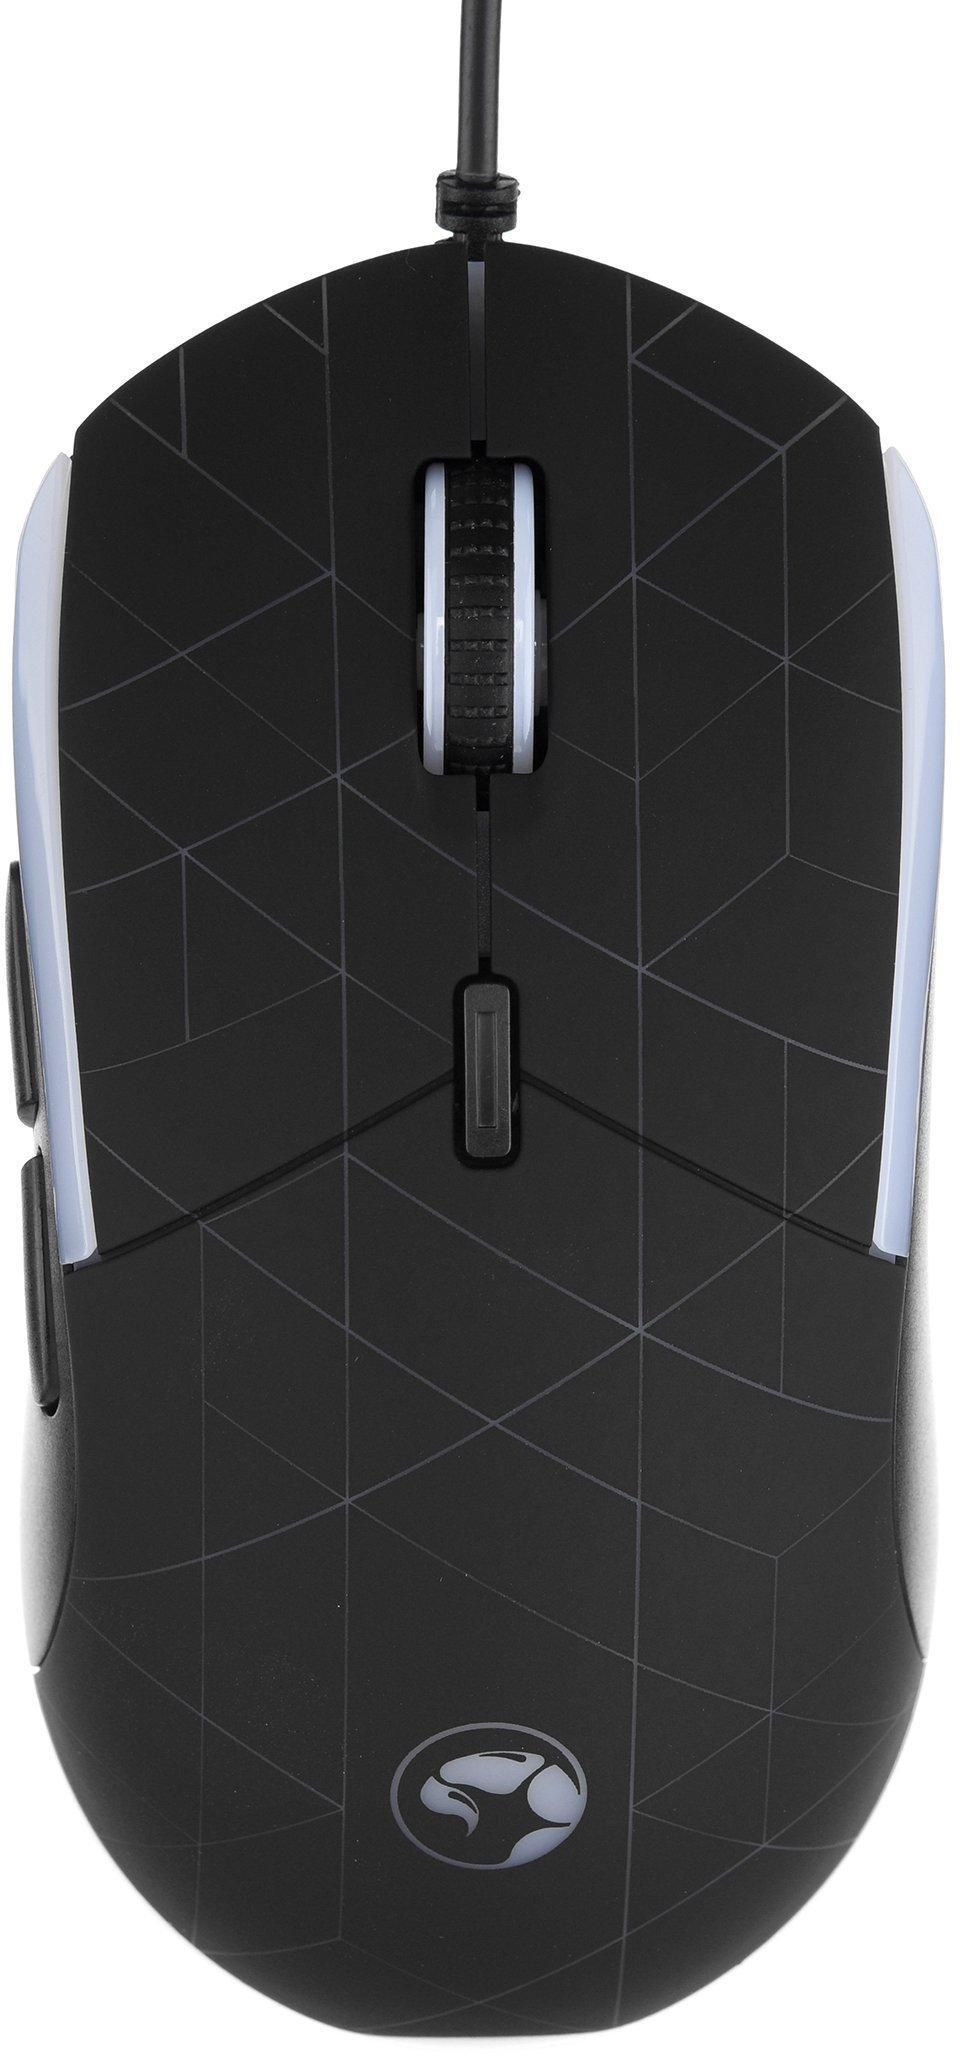 MARVO, Wired Gaming Mouse, Black